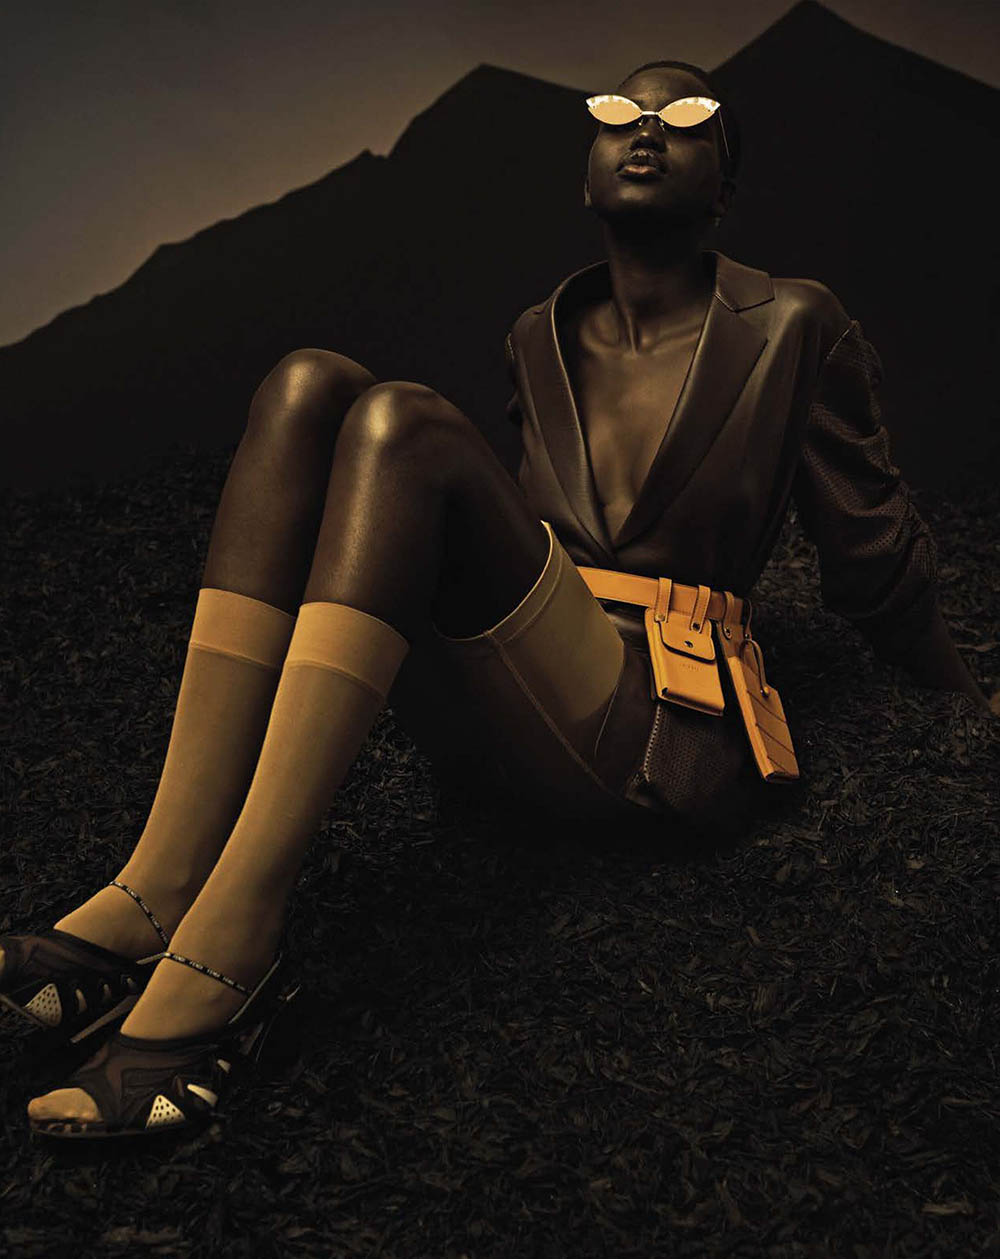 Adut Akech by Josh Olins for Vogue Italia April 2019